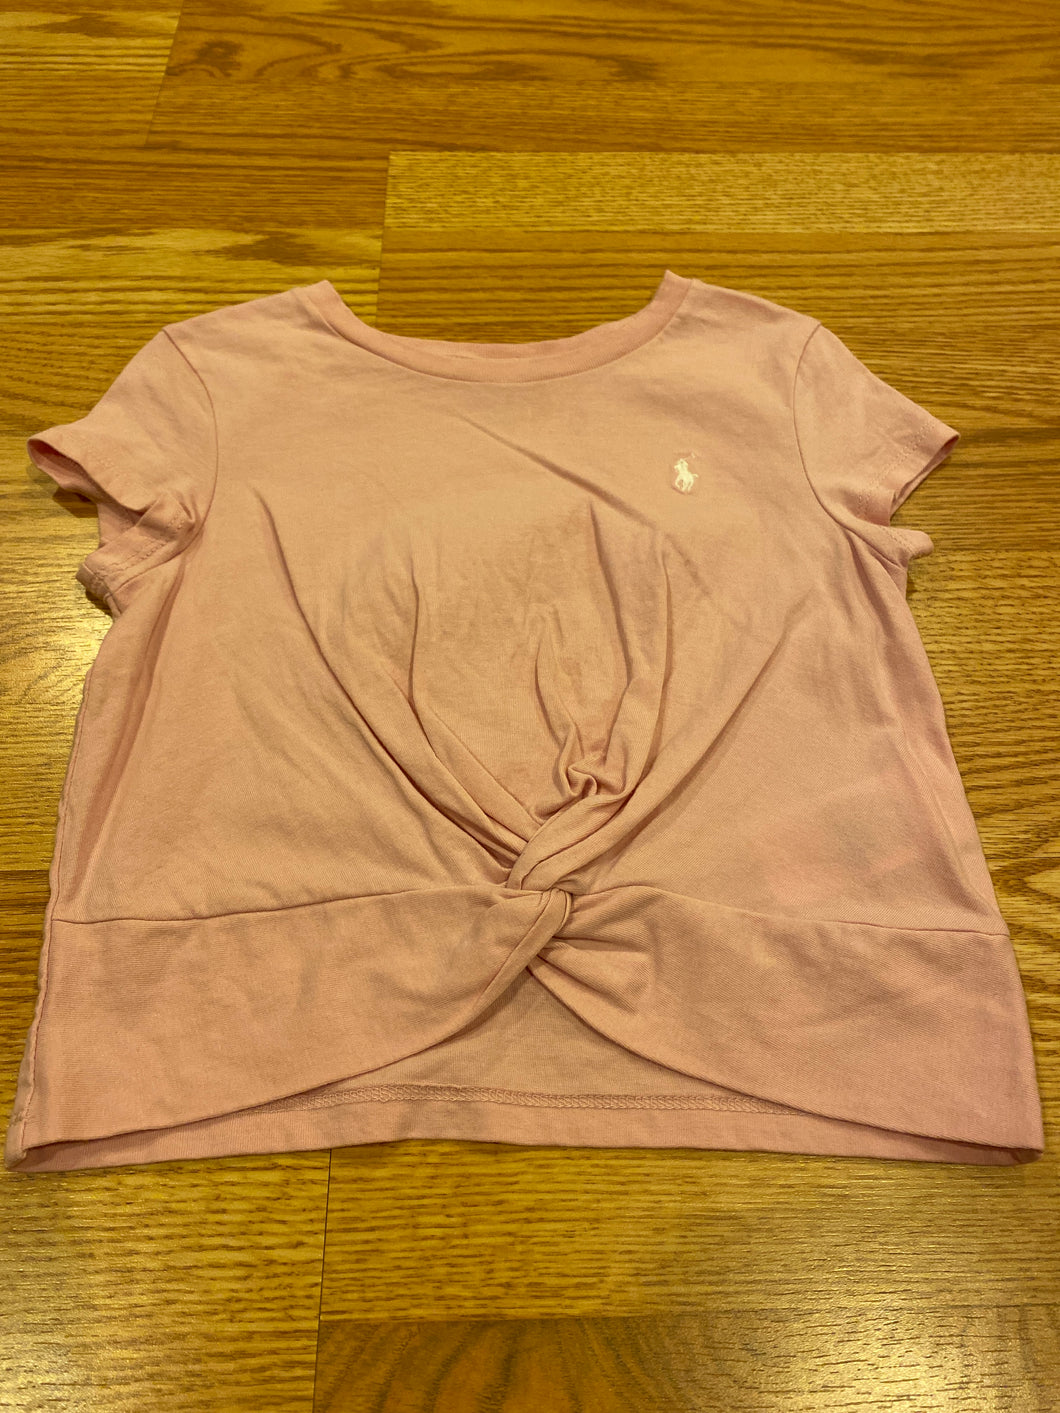 Light Pink T-Shirt  New without Tags by Ralph Lauren  4T